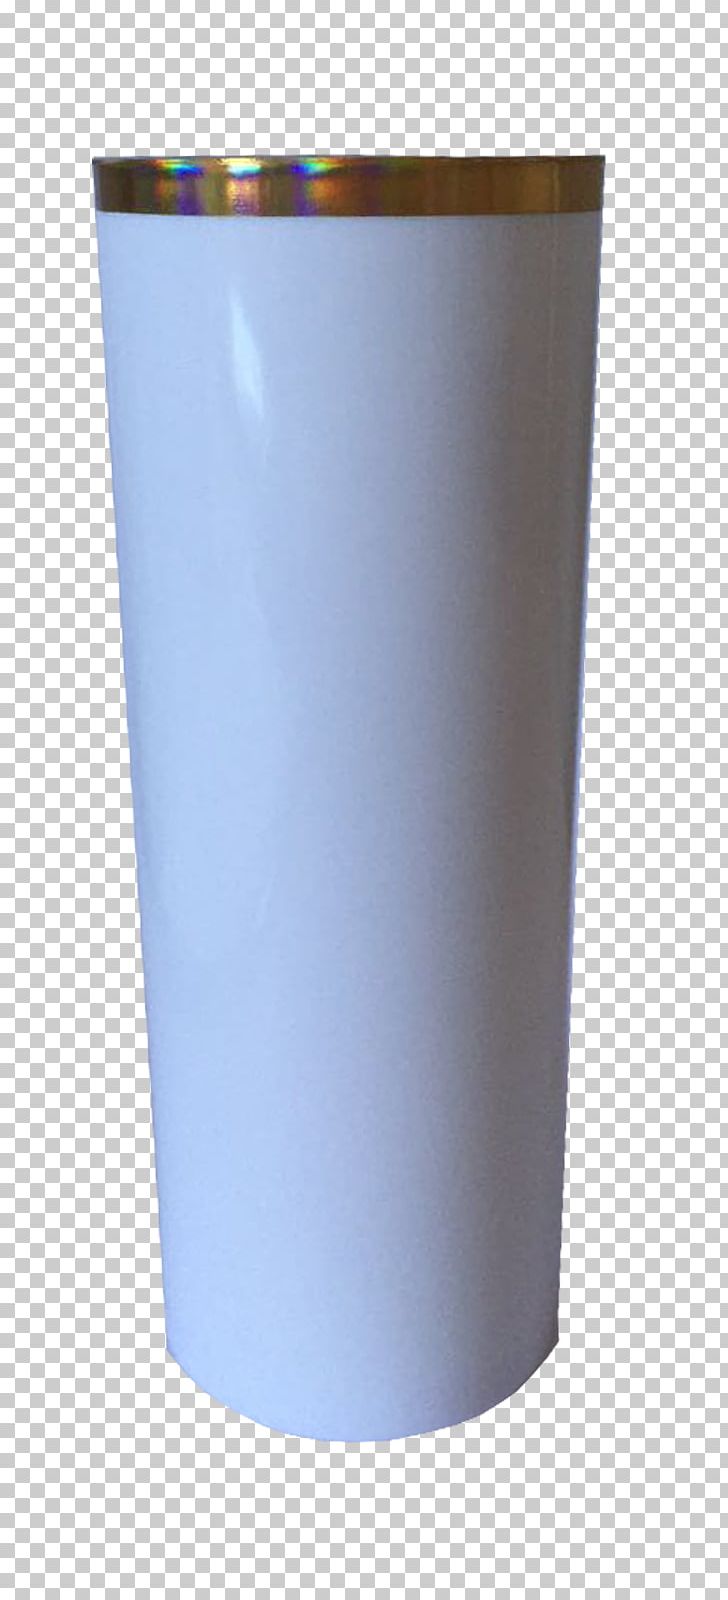 Plastic Cylinder PNG, Clipart, Art, Cup, Cylinder, Drinkware, Long Drink Free PNG Download